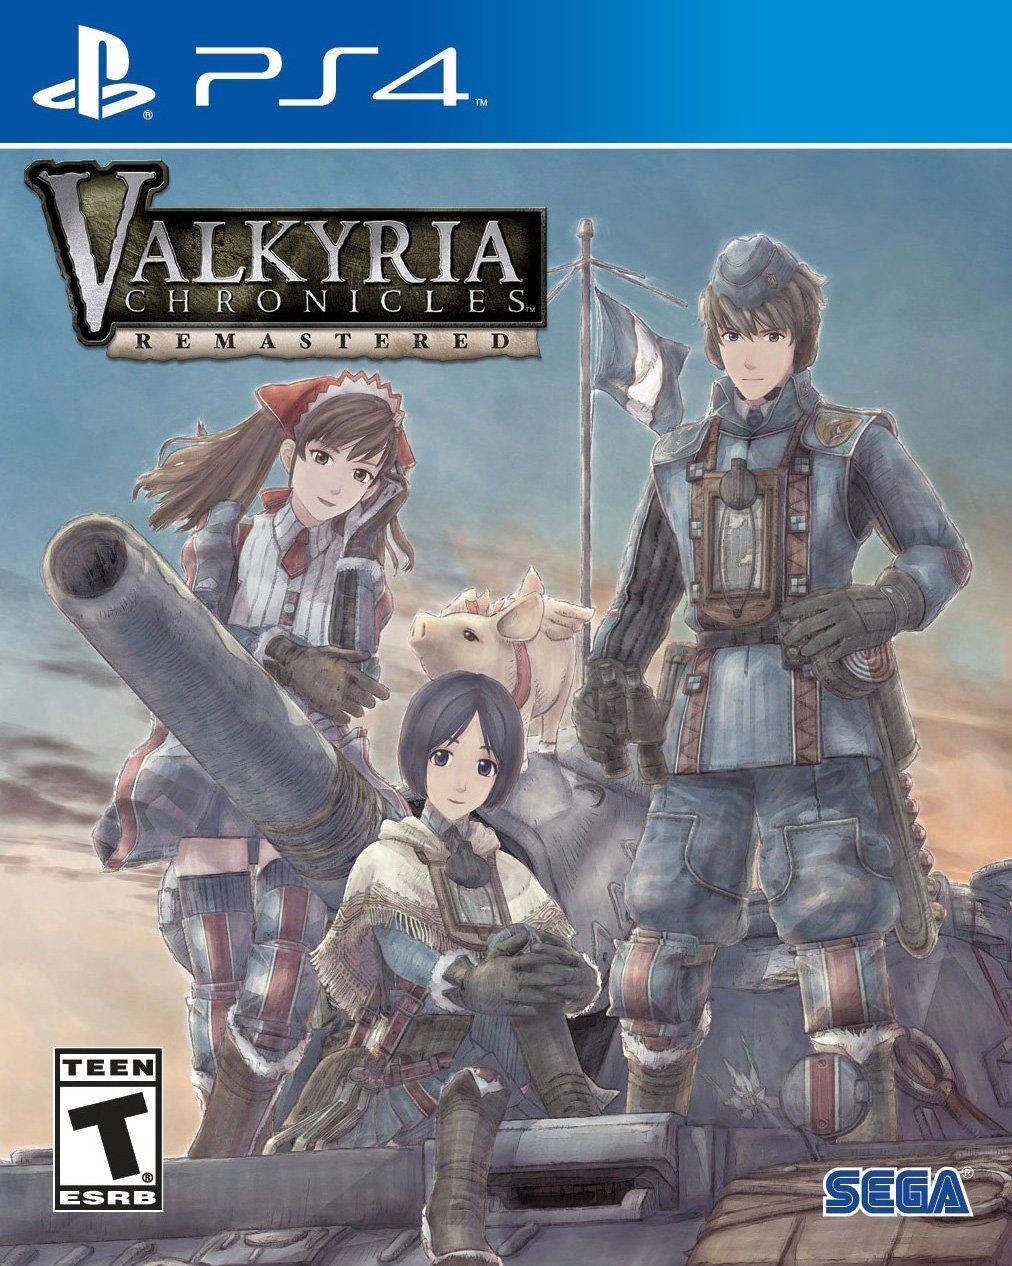 Valkyria Chronicles Ps4 Poster Background